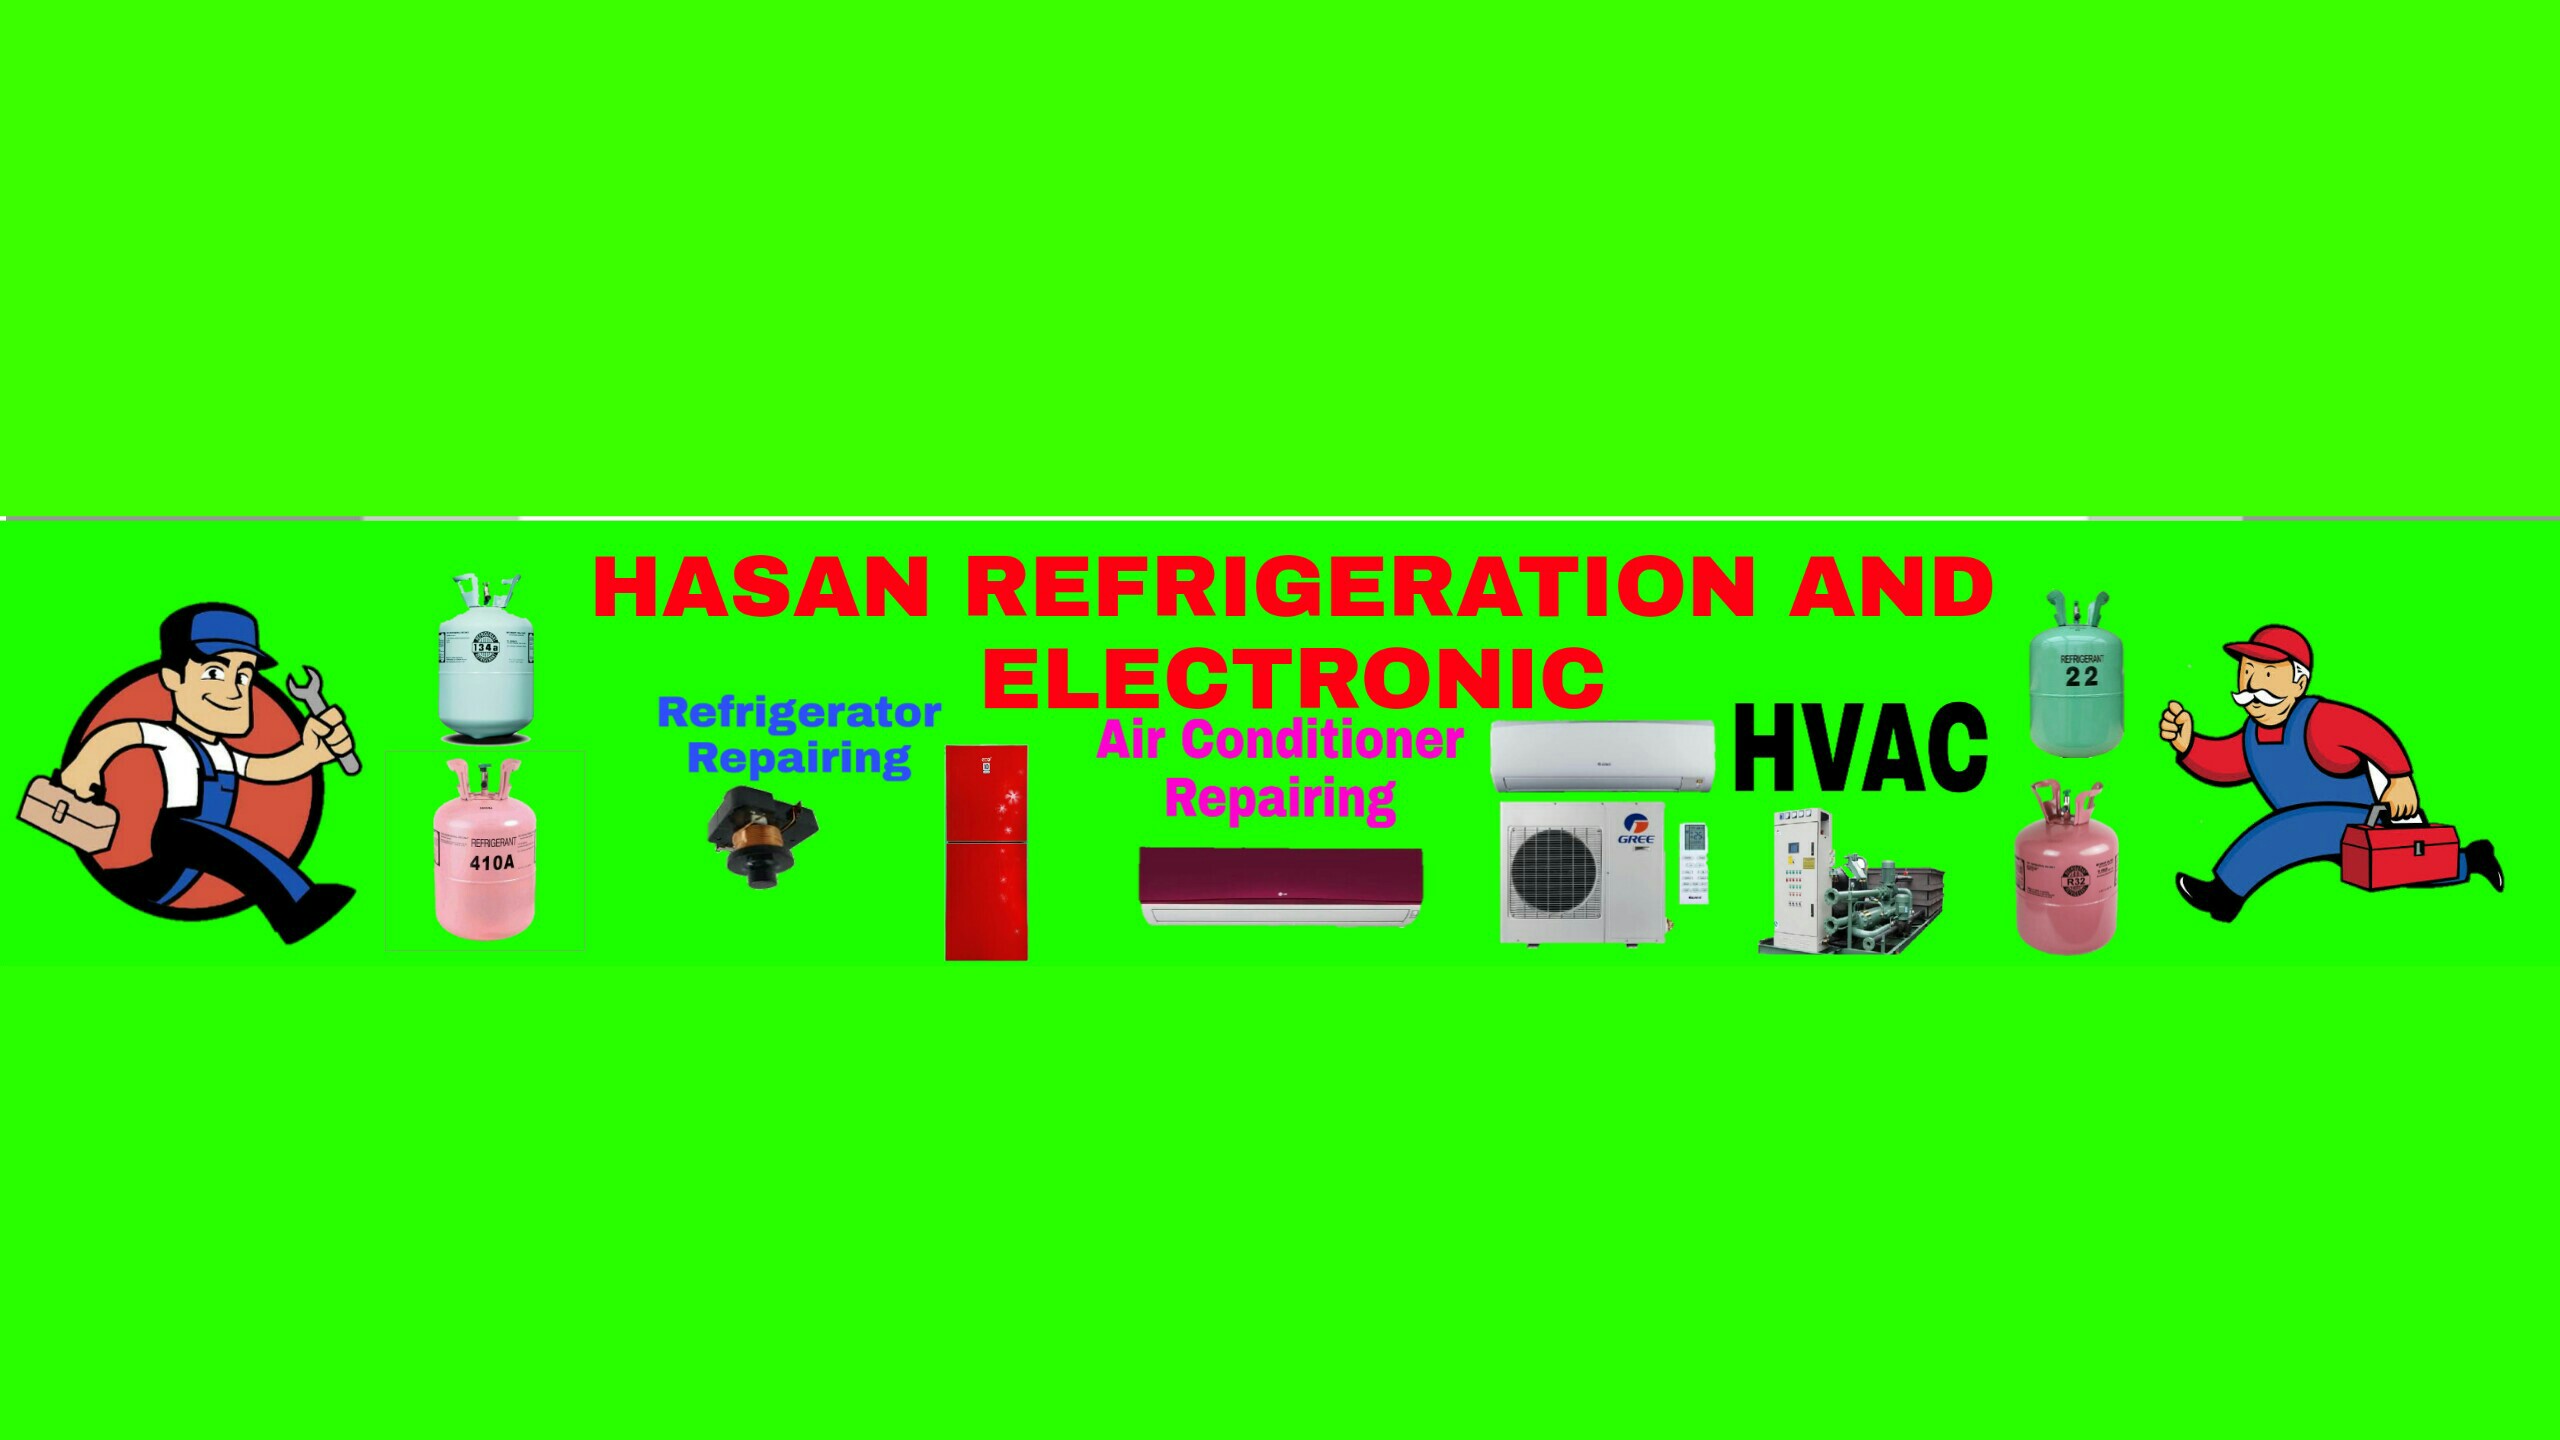 HASAN REFRIGERATION AND ELECTRONIC  BD